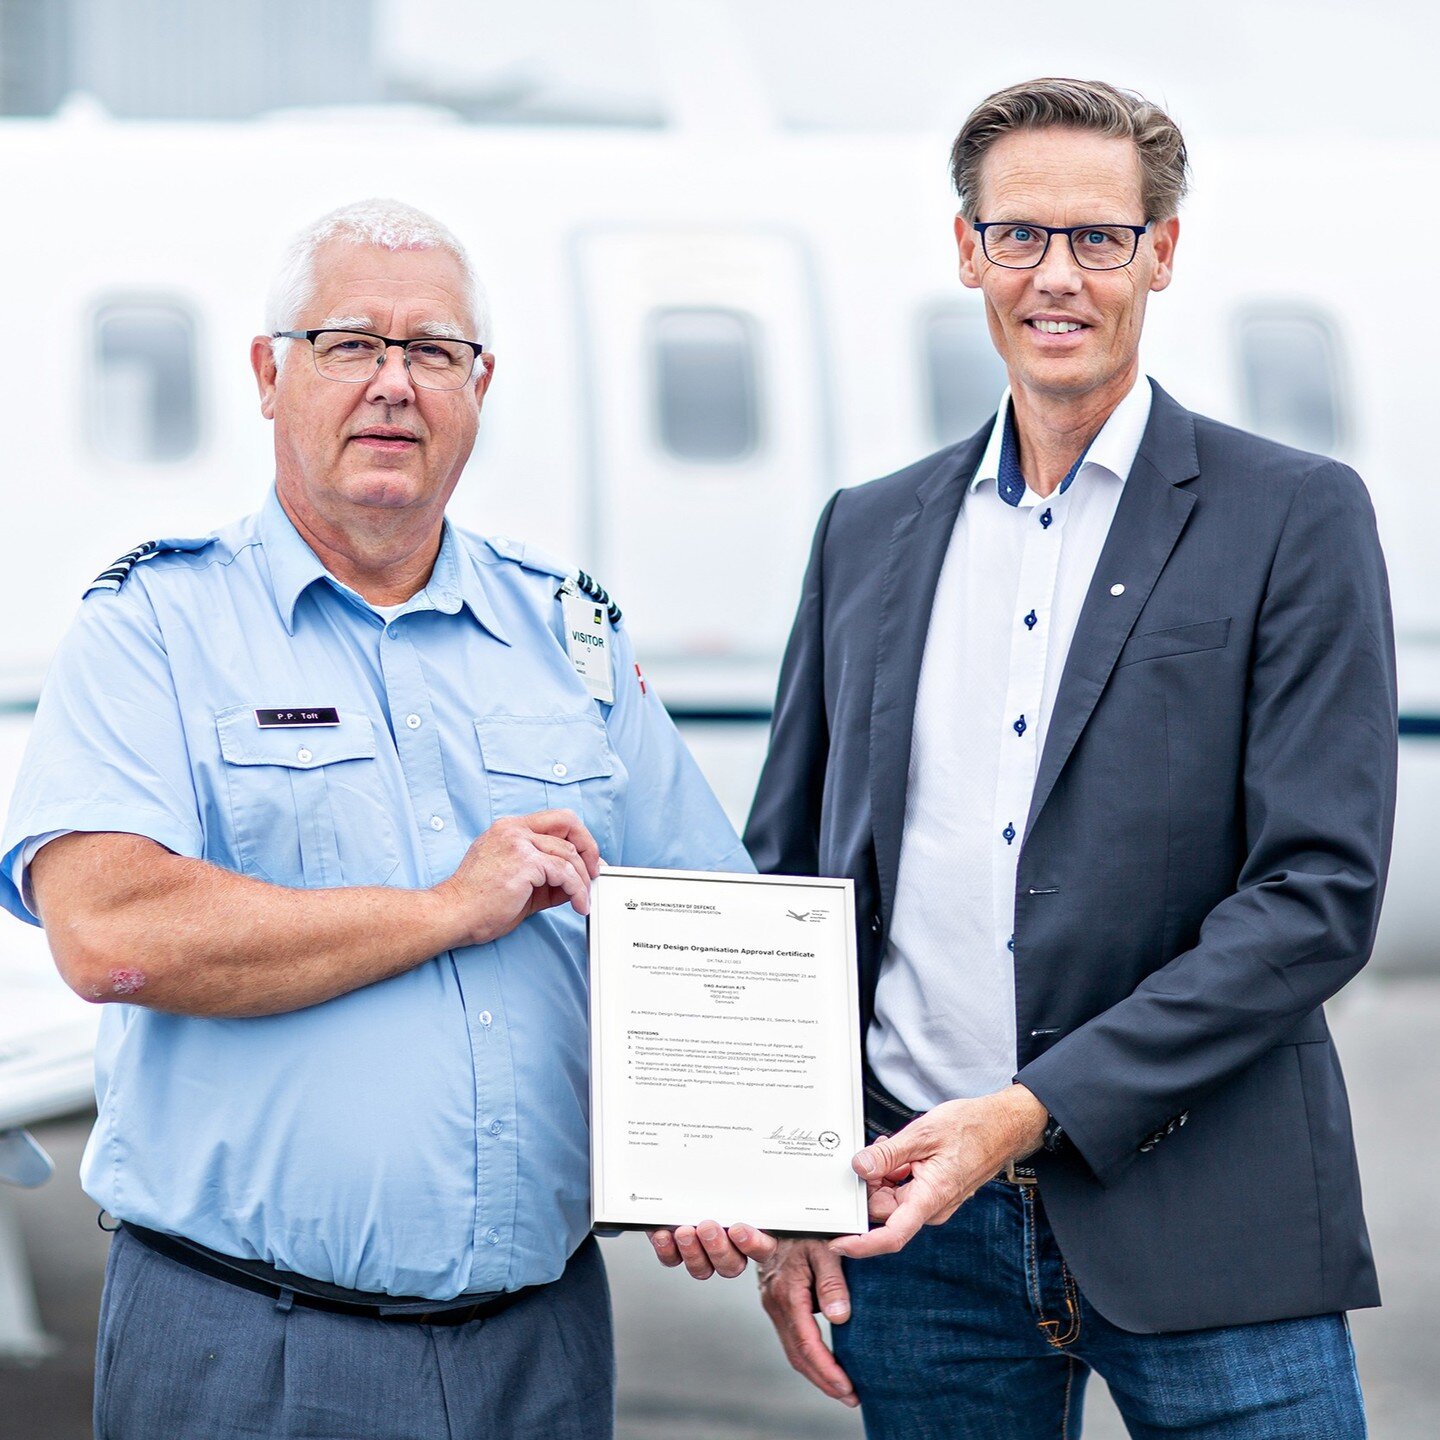 DAO Aviation A/S receives Military Design Organisation Approval from The Danish Ministry of Defence

DAO Aviation A/S, Part 21J Design Organisation, located in Copenhagen Airport - Roskilde, has upon evaluation and auditing of the Danish Defense Tech